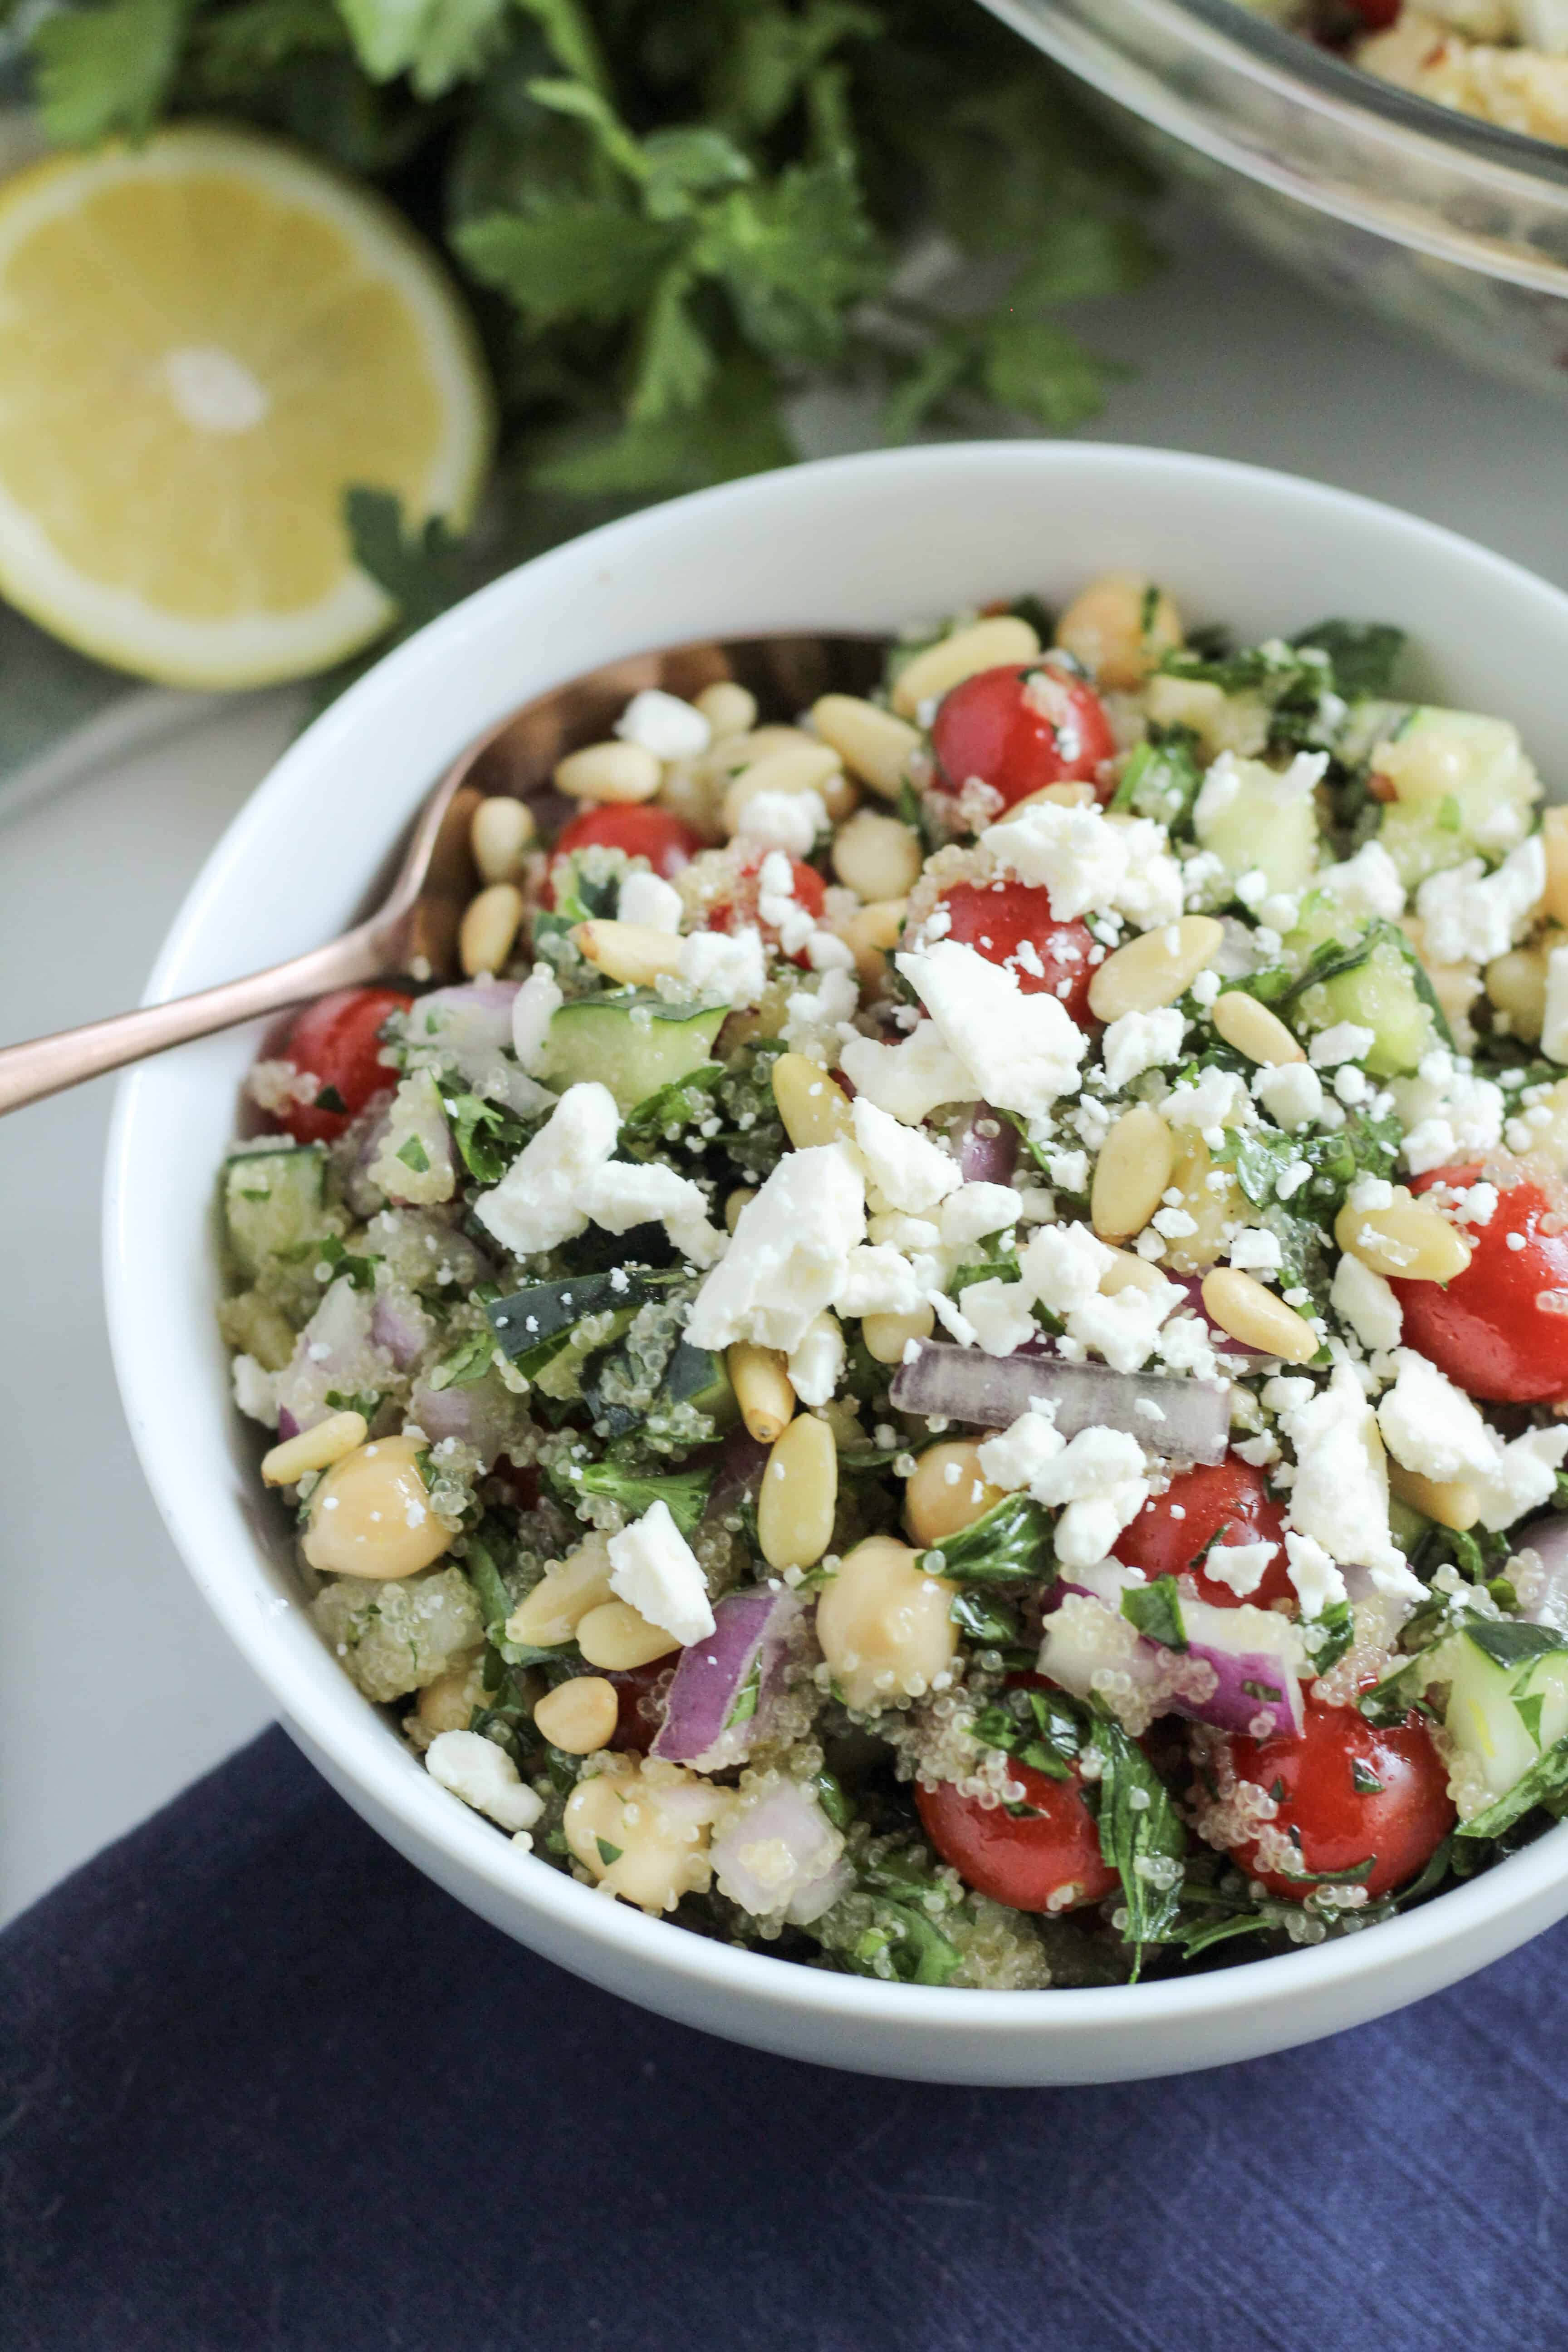 Amaranth Tabbouleh with Chickpeas | Celebrate the fresh flavor with this spin on traditional tabbouleh salad. This amaranth tabbouleh with chickpeas is one of the easiest amaranth recipes!